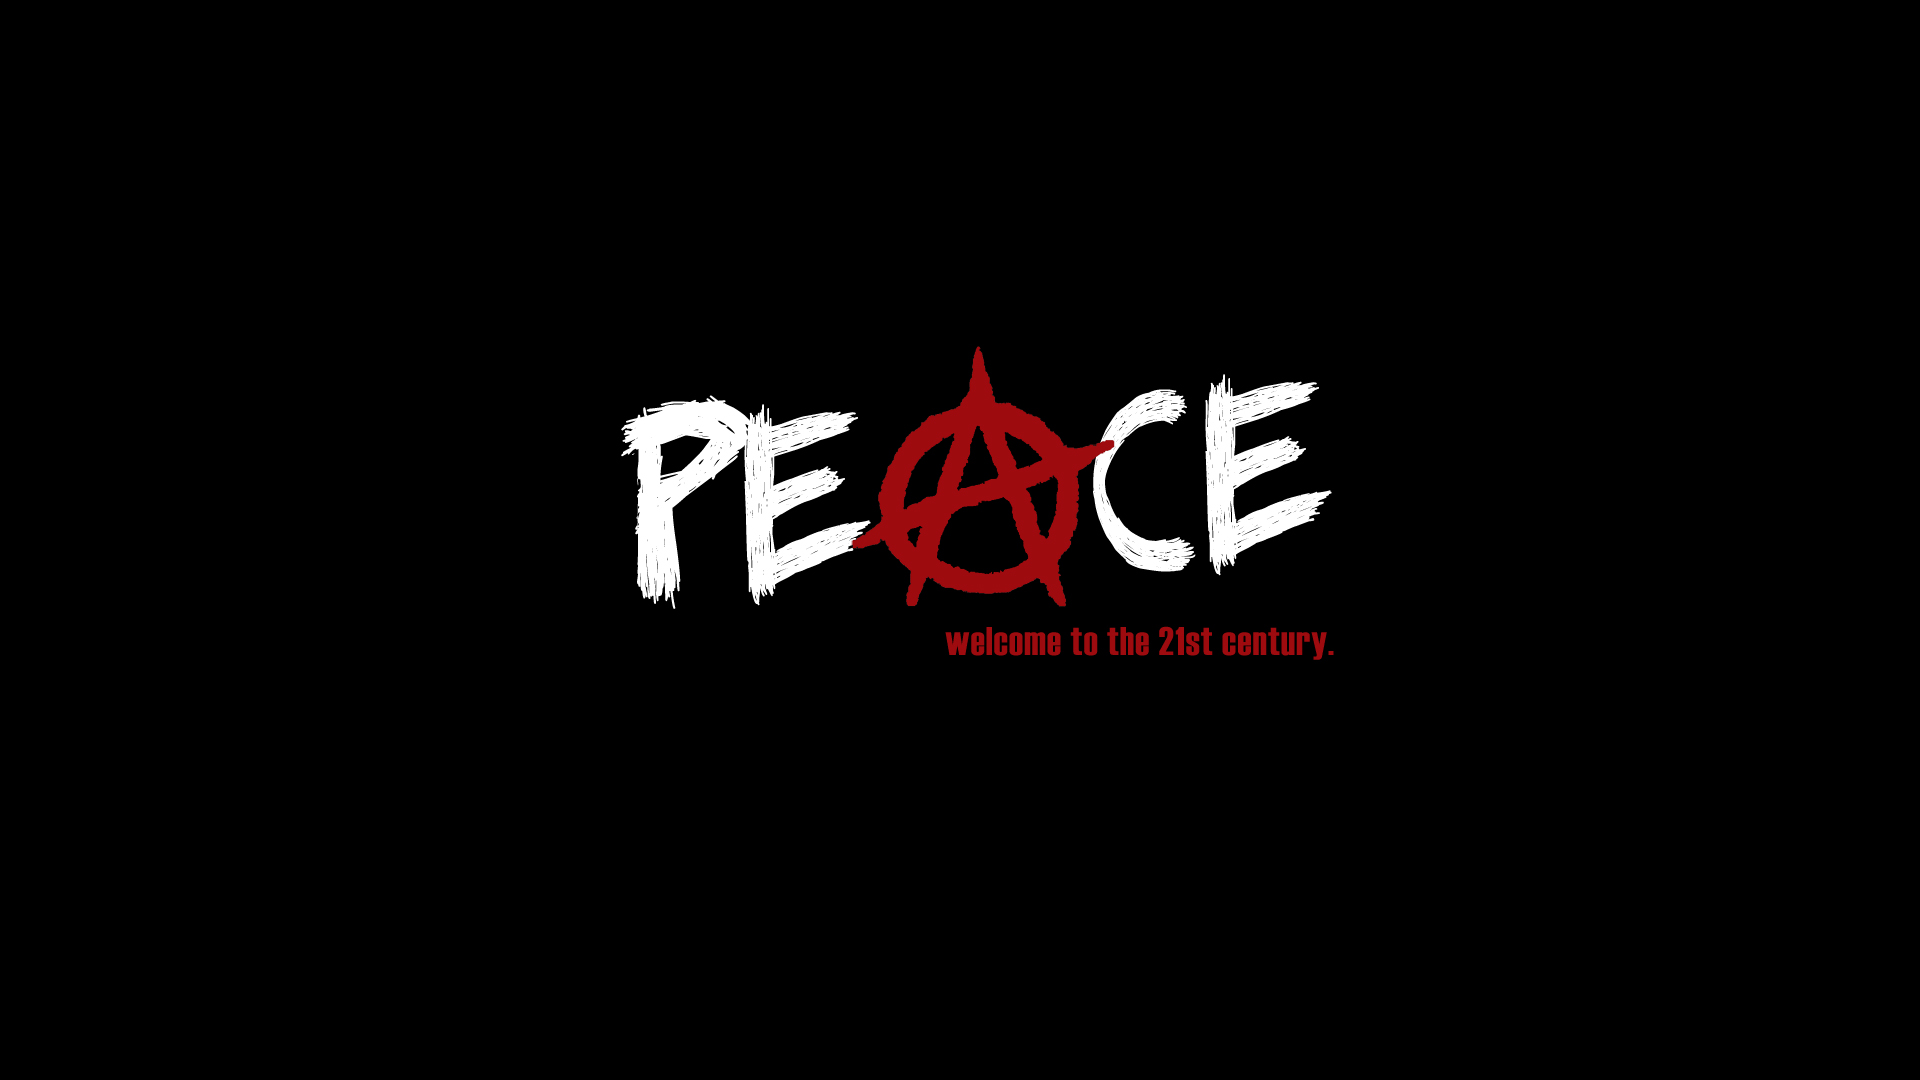 Anarchy Symbol Wallpaper 48 pictures